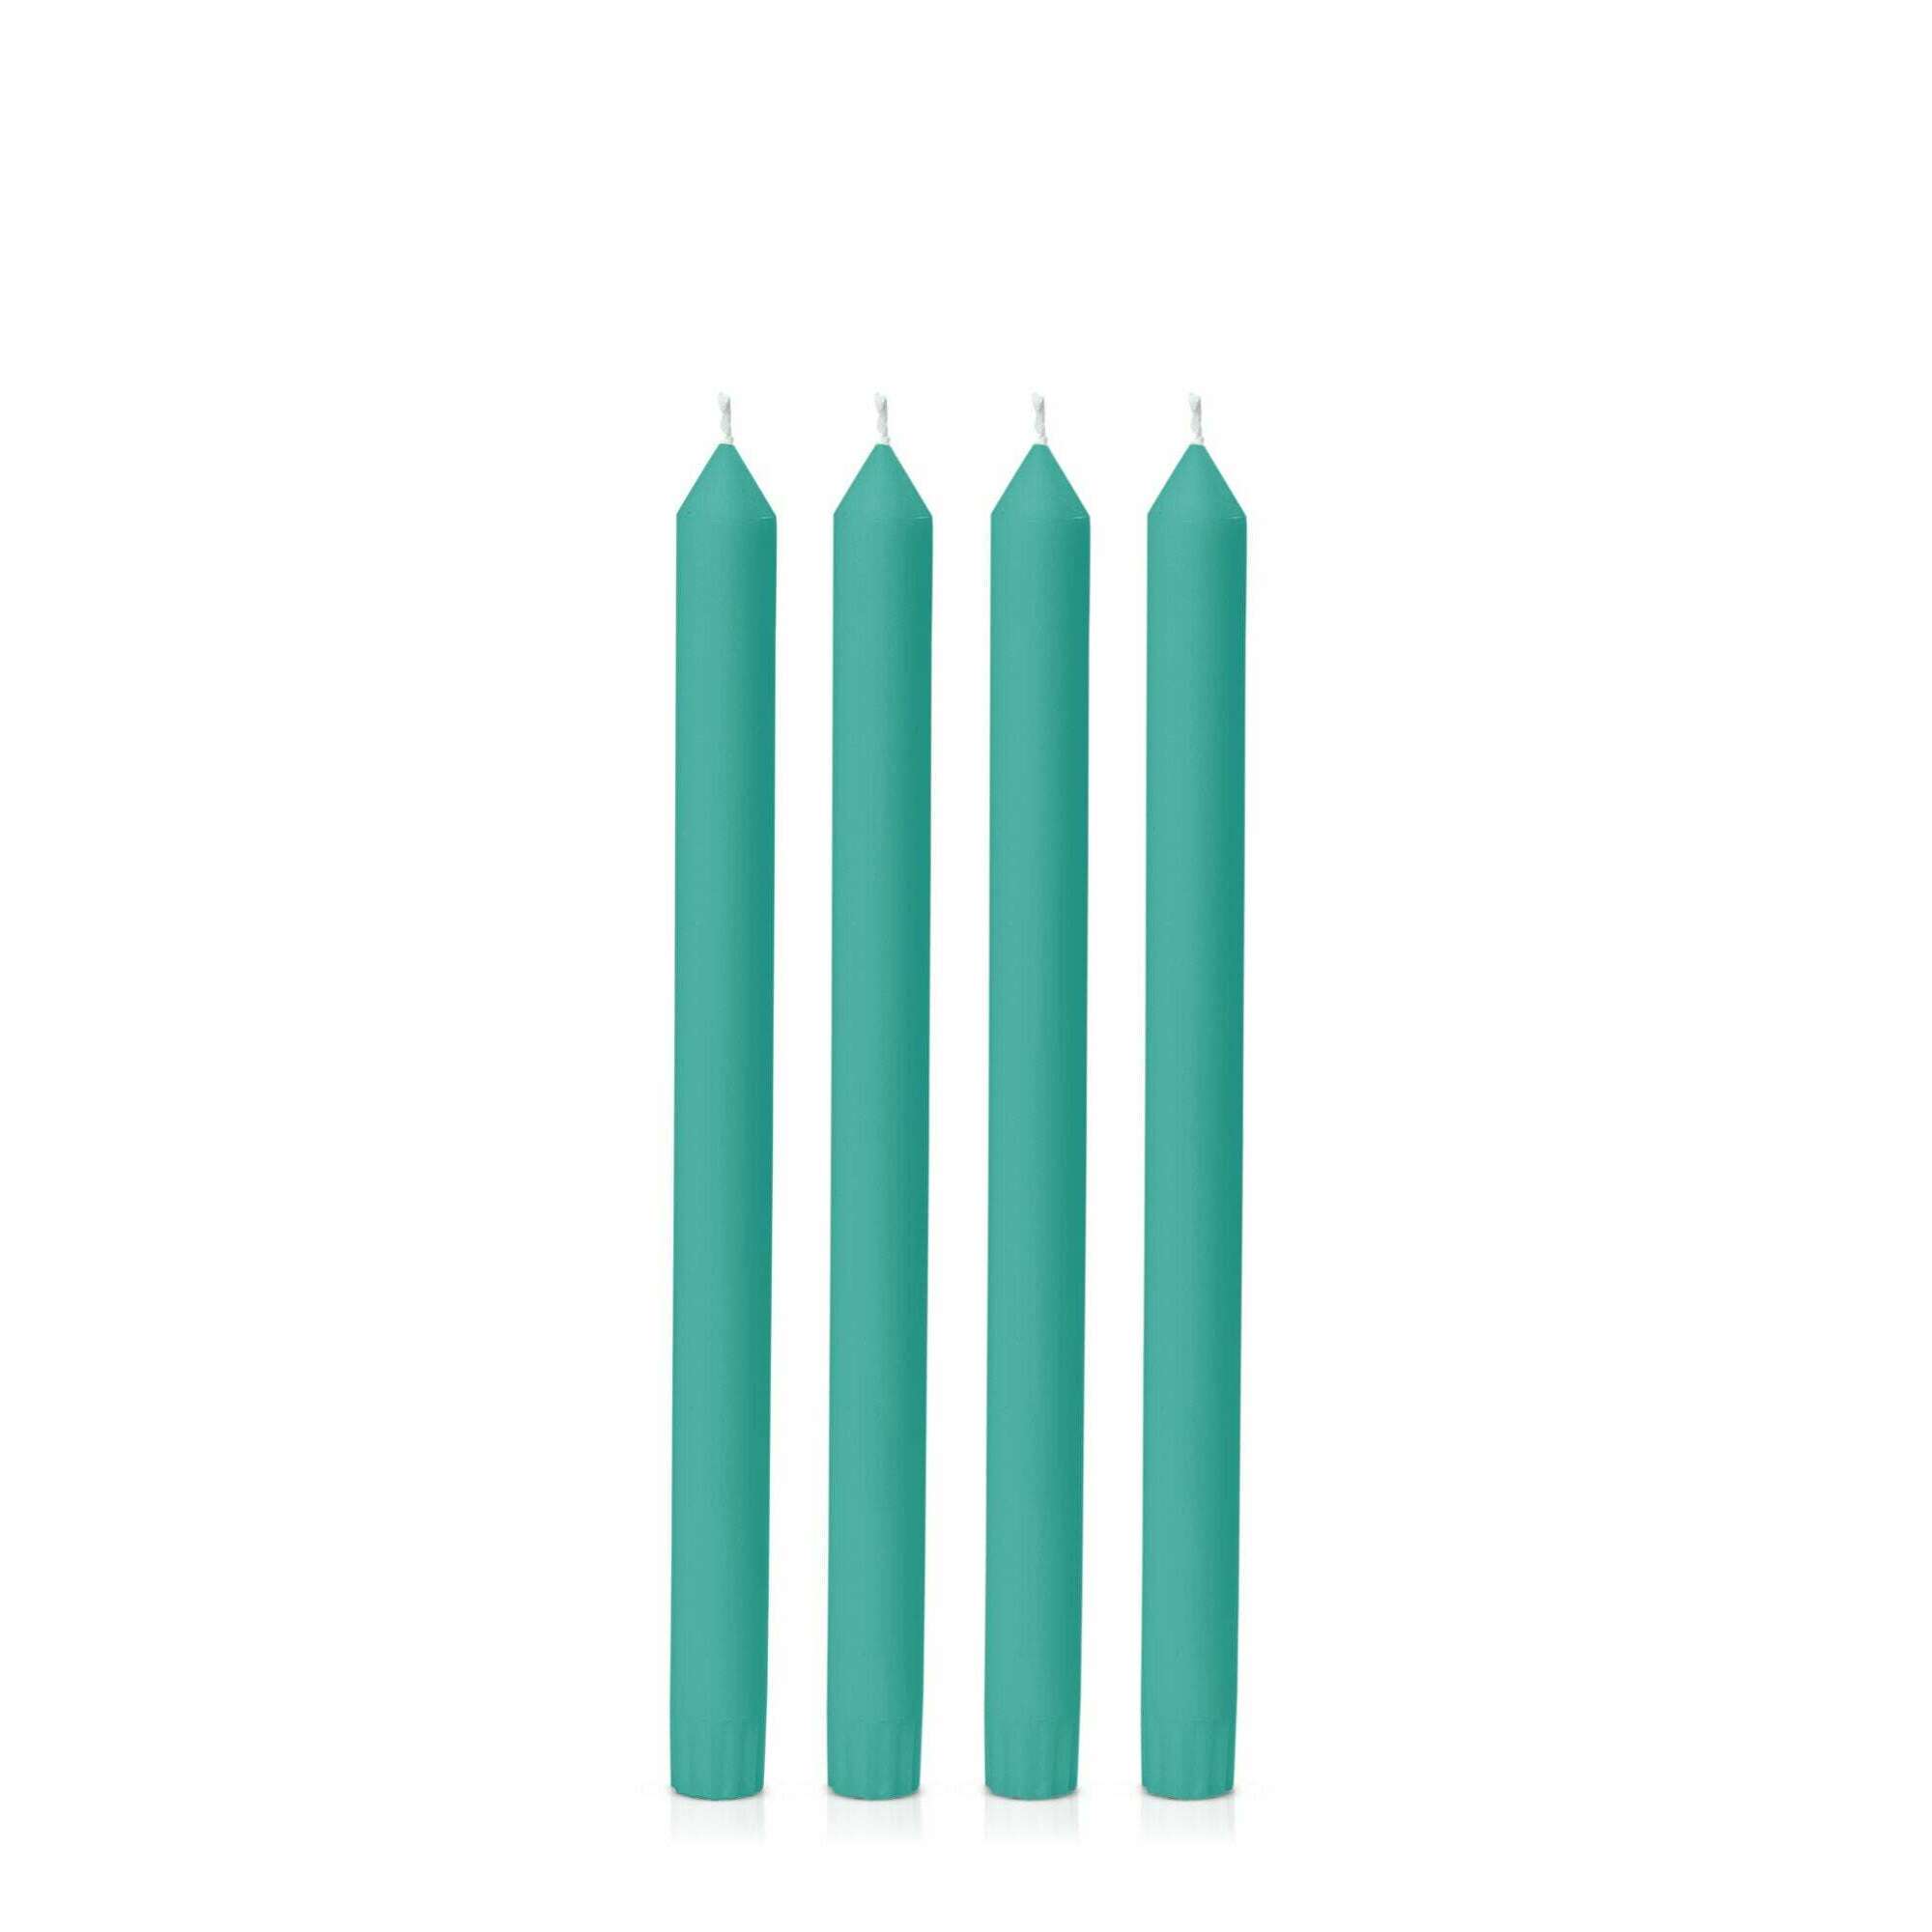 Impodimo Living & Giving:Moreton Eco Dinner Candle - Emerald Green:Candle Co